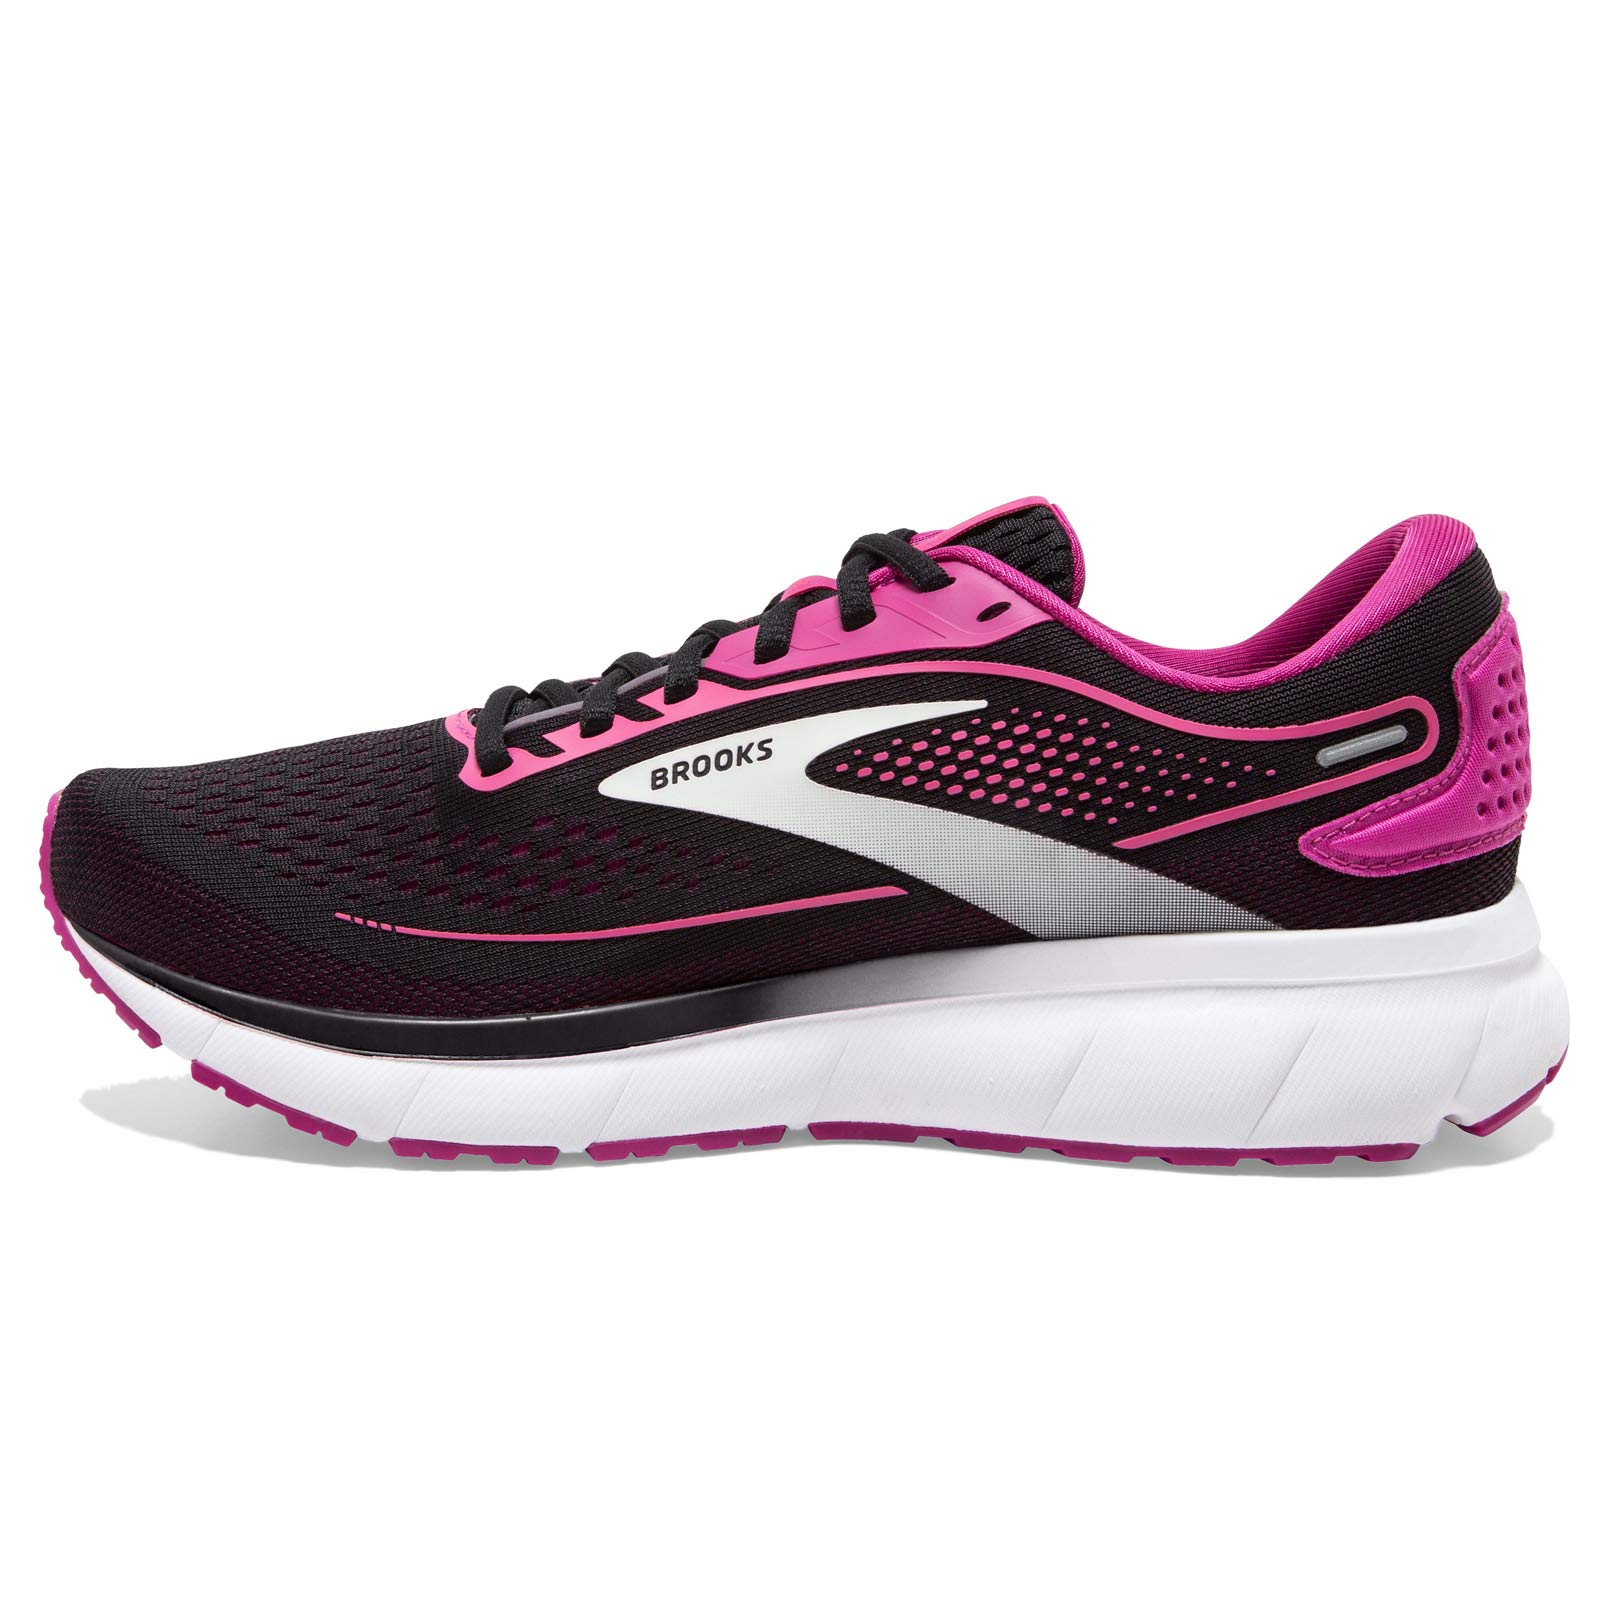 BROOKS TRACE 2 WOMENS RUNNING SHOES